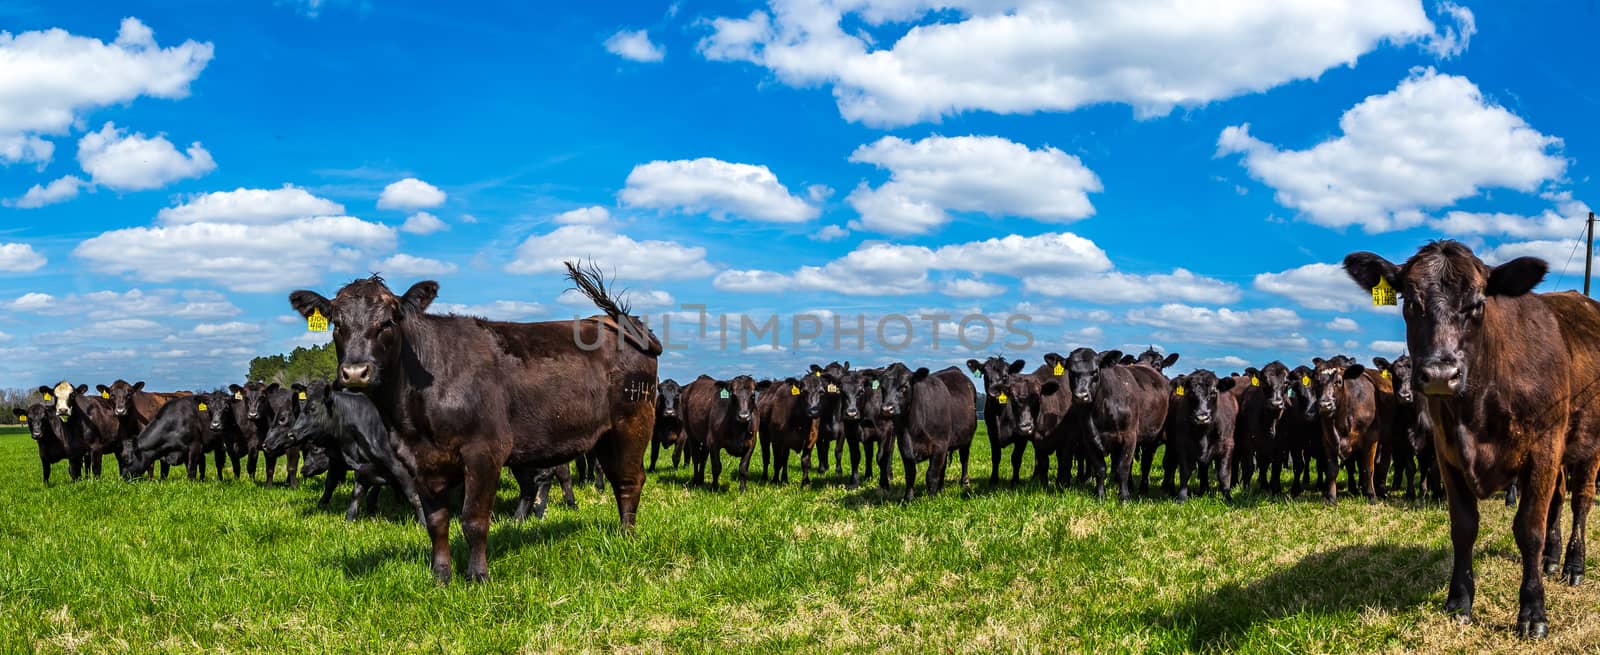 Angus cattle in a pasture in Southeastern Georgia.